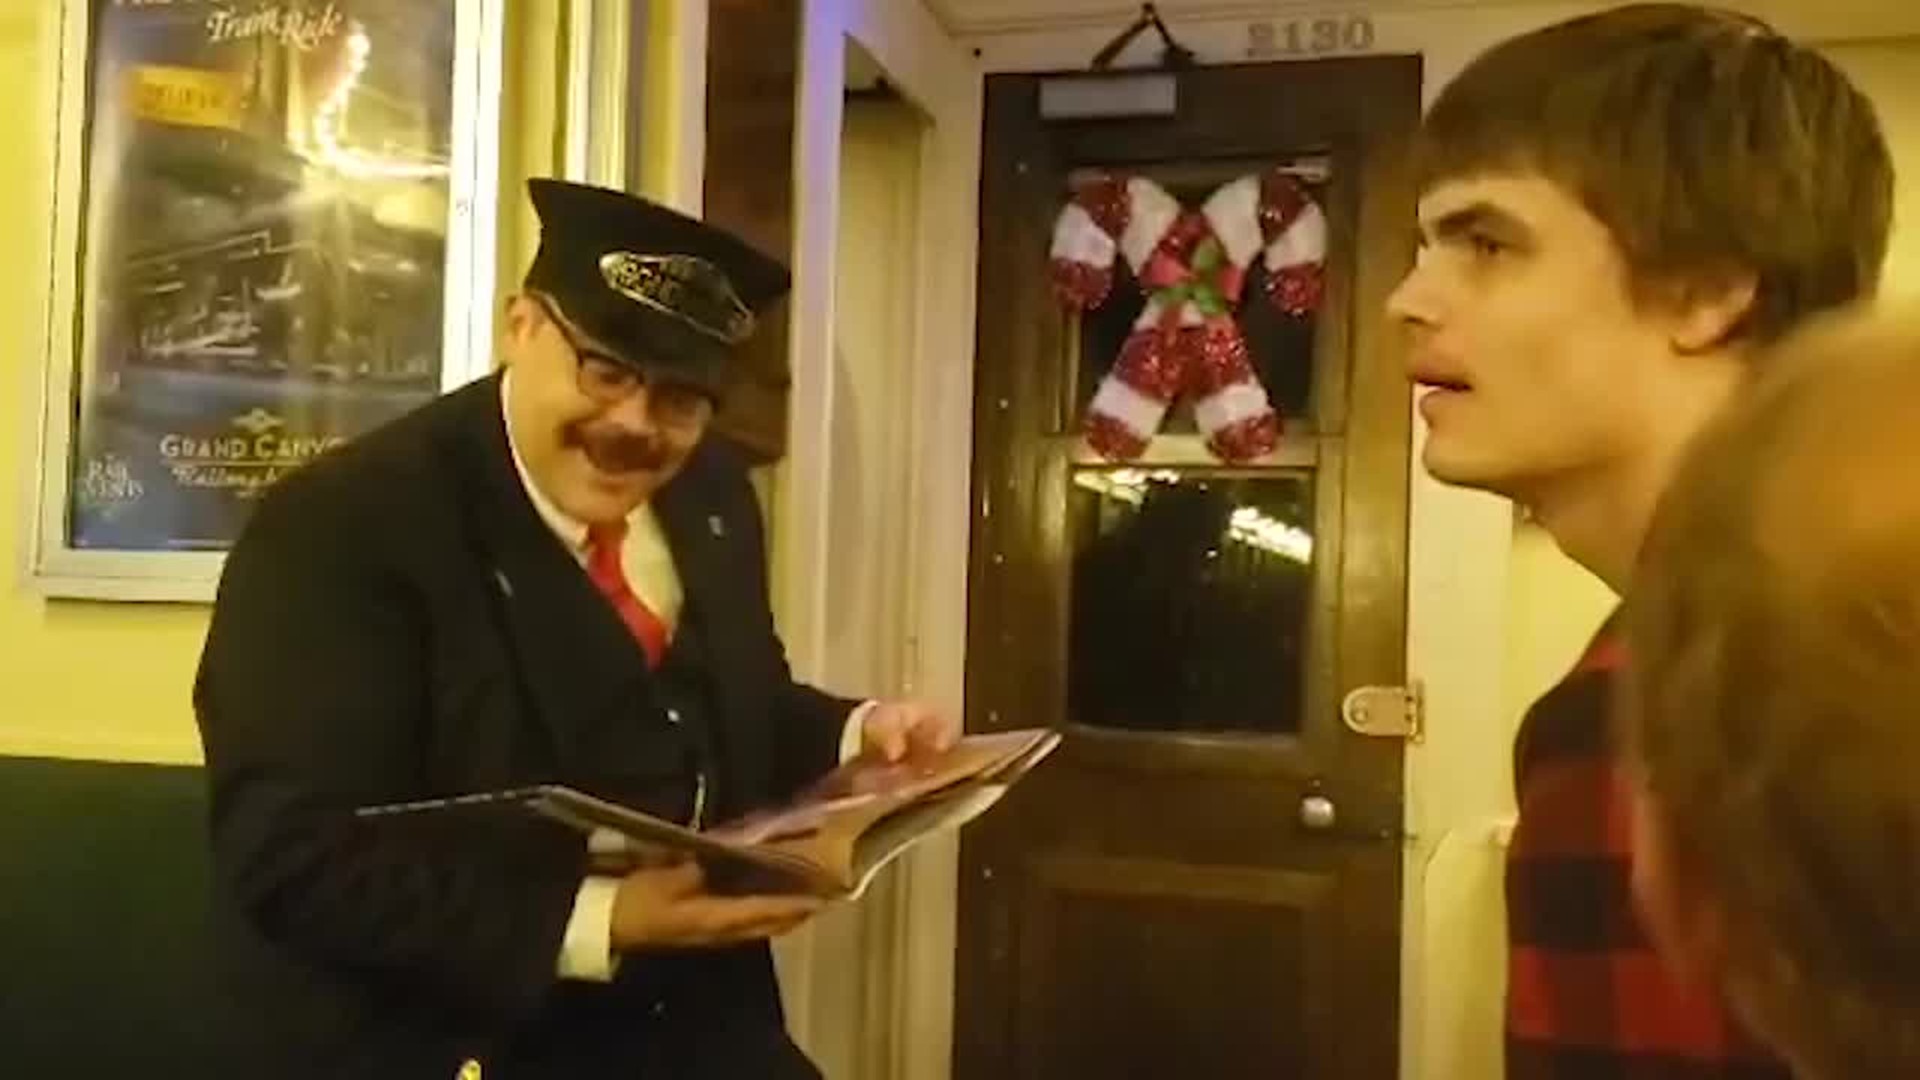 When a teen with autism was boarding the Polar Express train, he became overstimulated and had to leave. But railroad staff went above and beyond to redeem the trip.